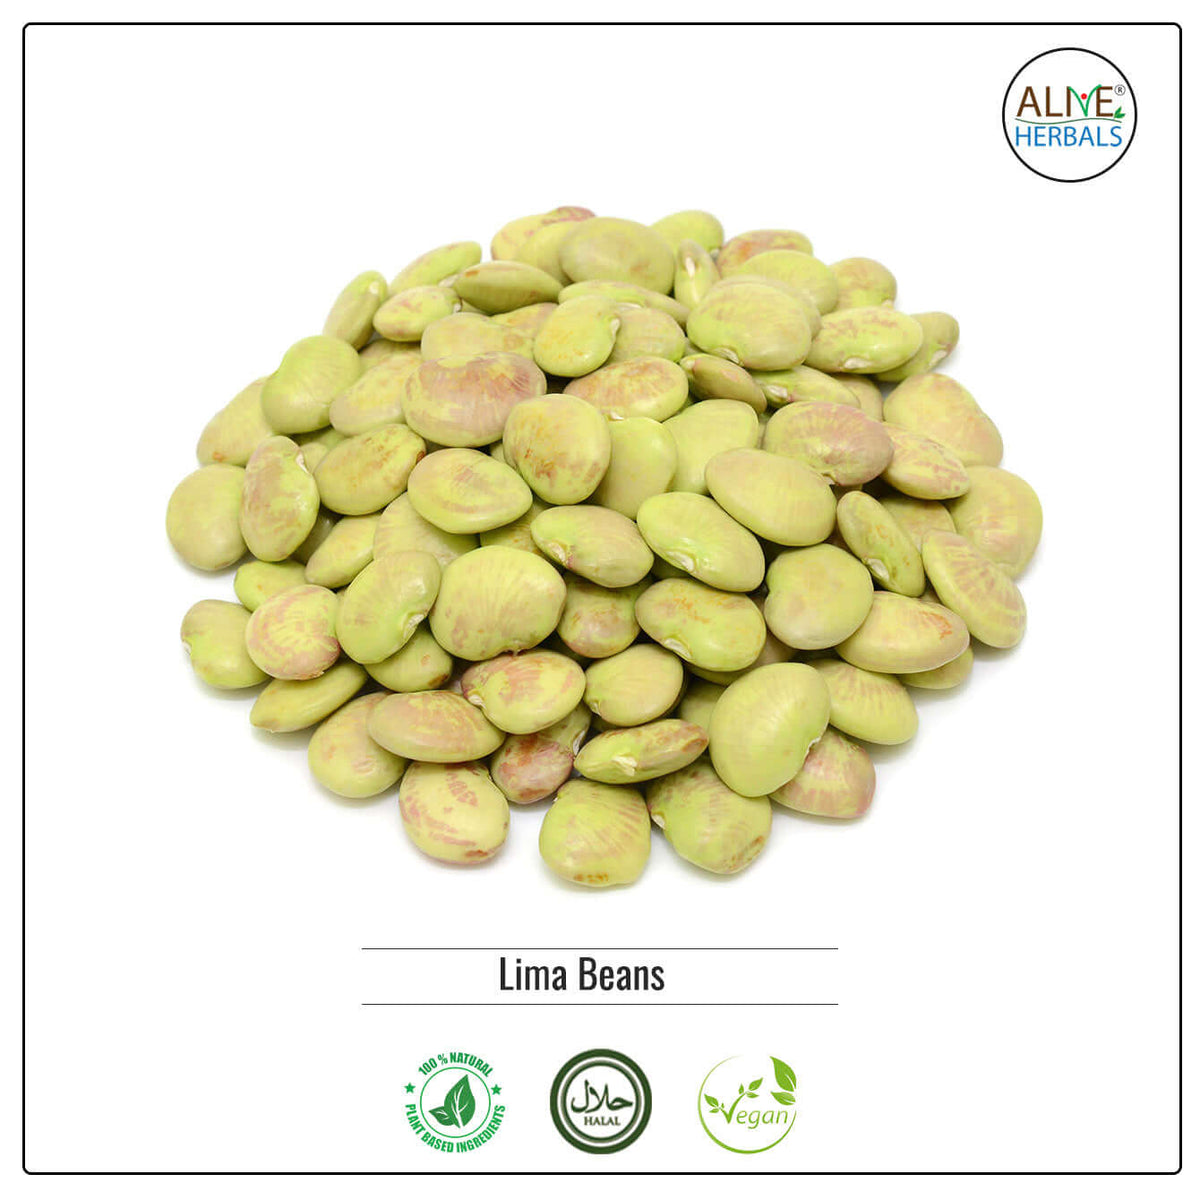 Lima Beans - Shop at Natural Food Store | Alive Herbals.